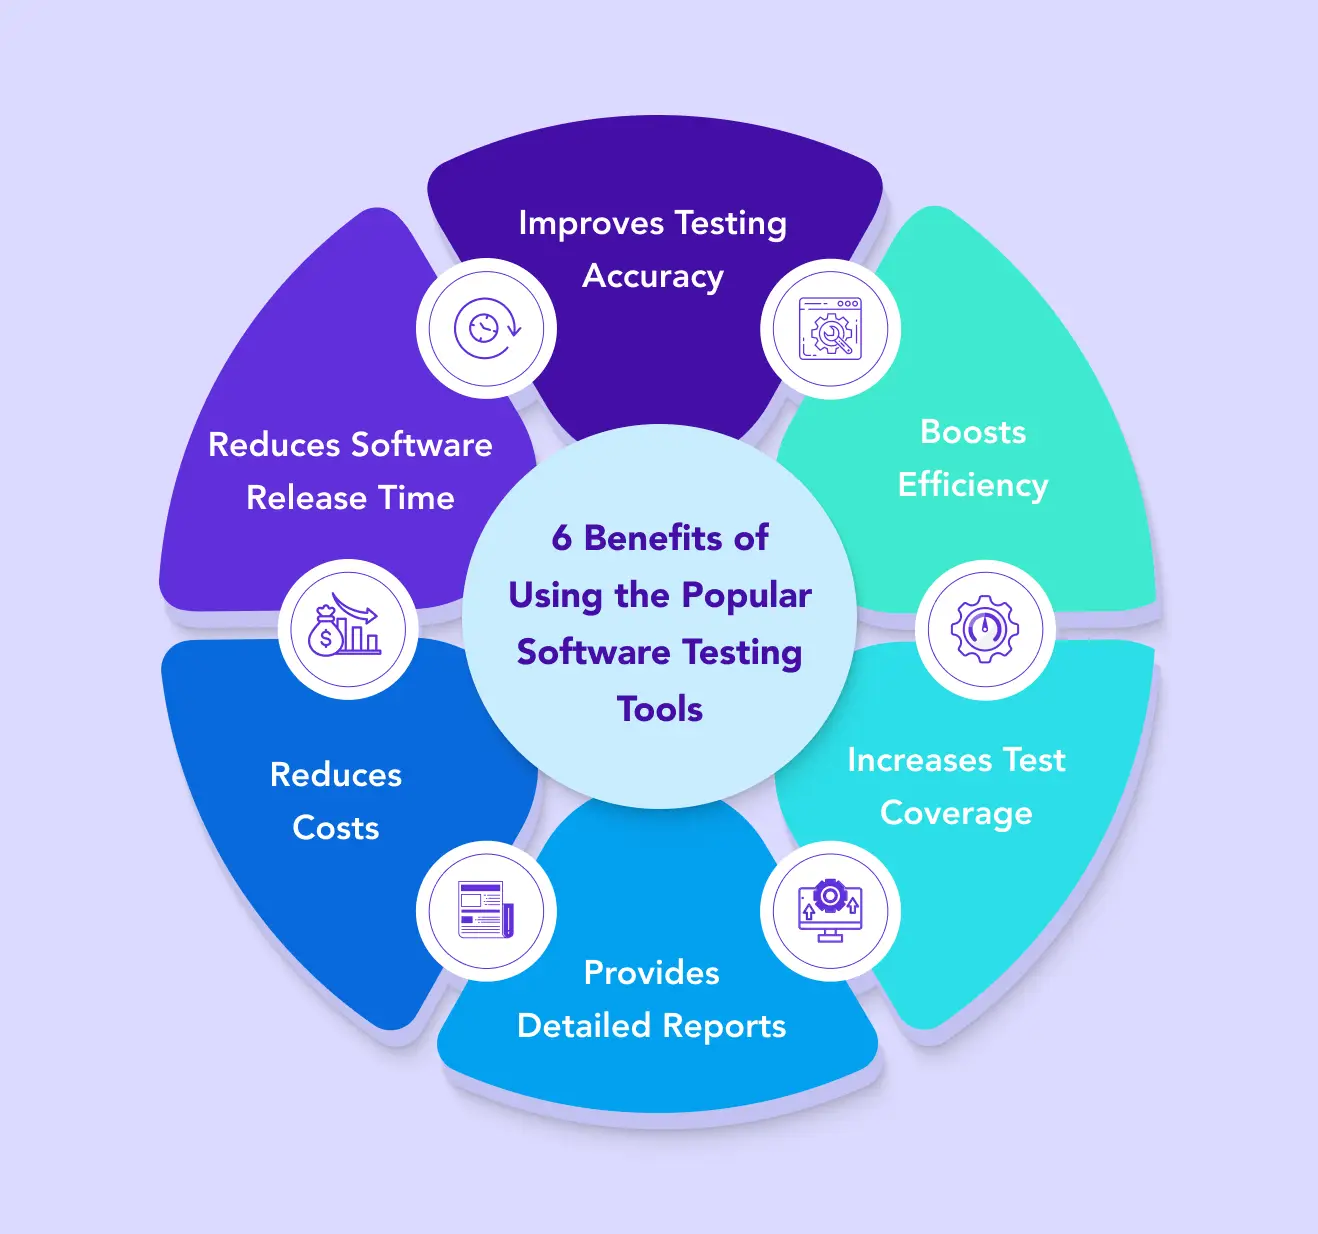 A Visual representation of 6 Benefits of Using the Popular Software Testing Tools.